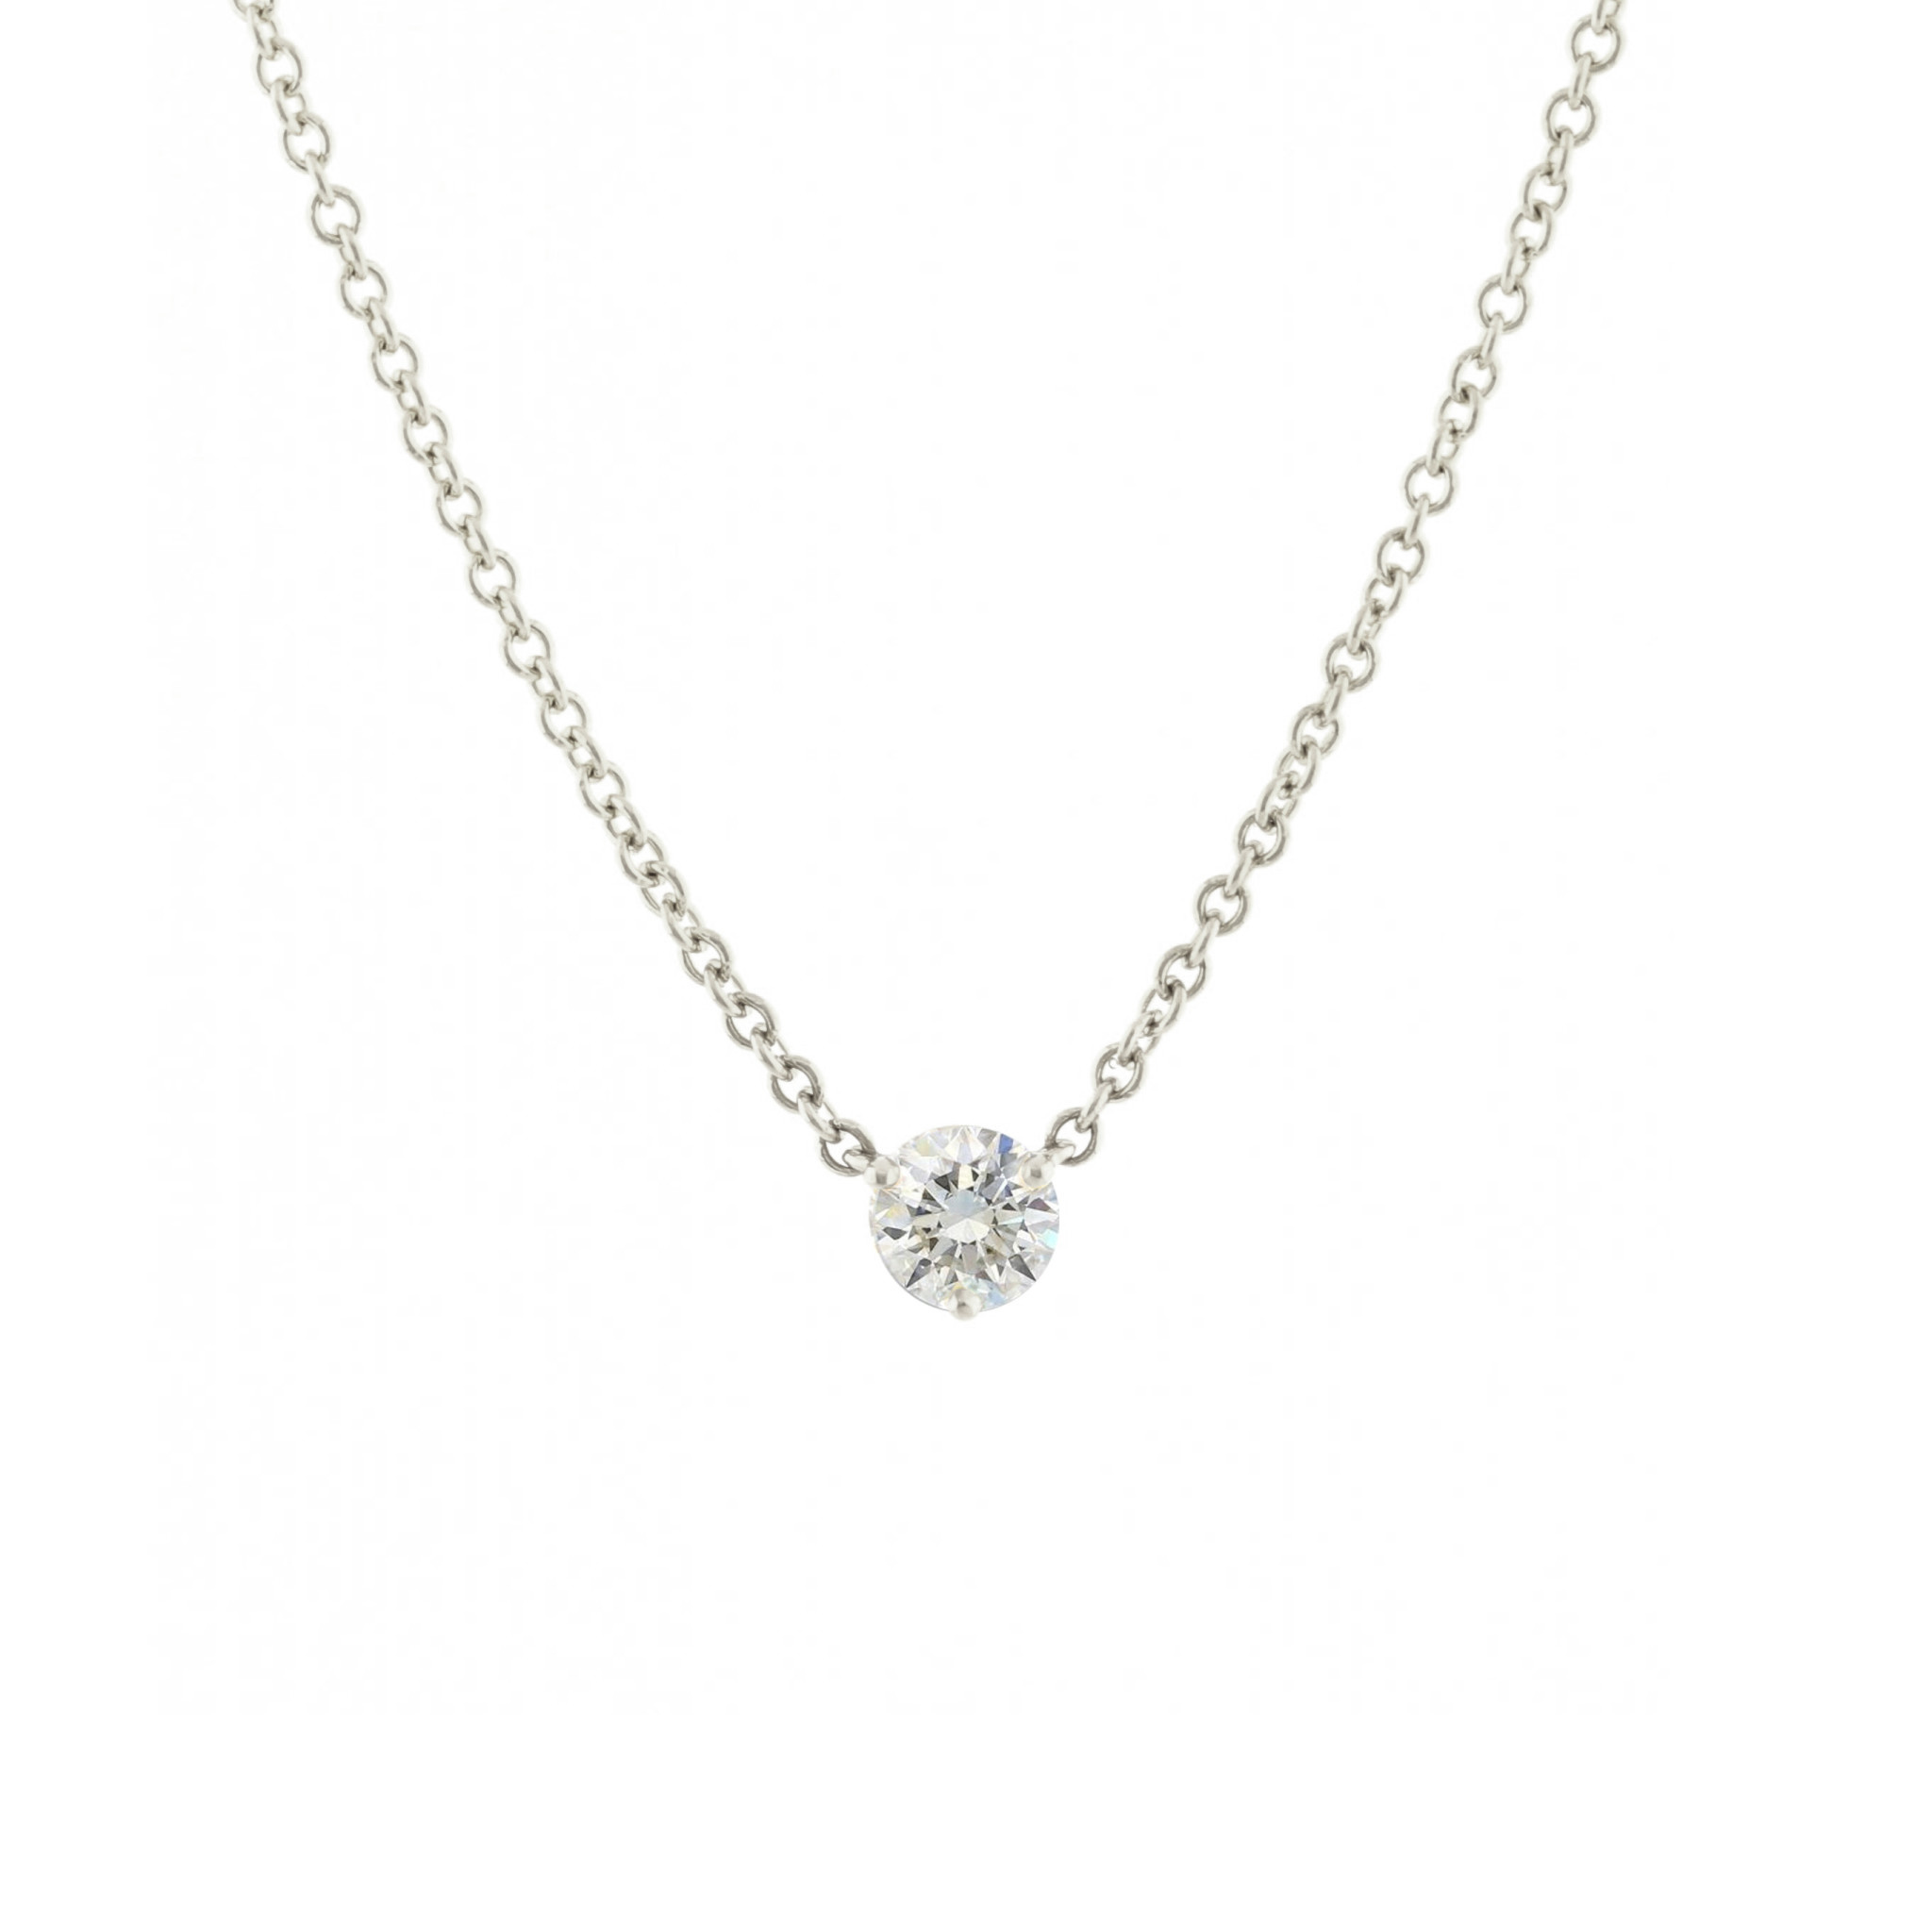 0.45 carat Round Diamond Solitaire Necklace in 14k white gold (DP-1178)